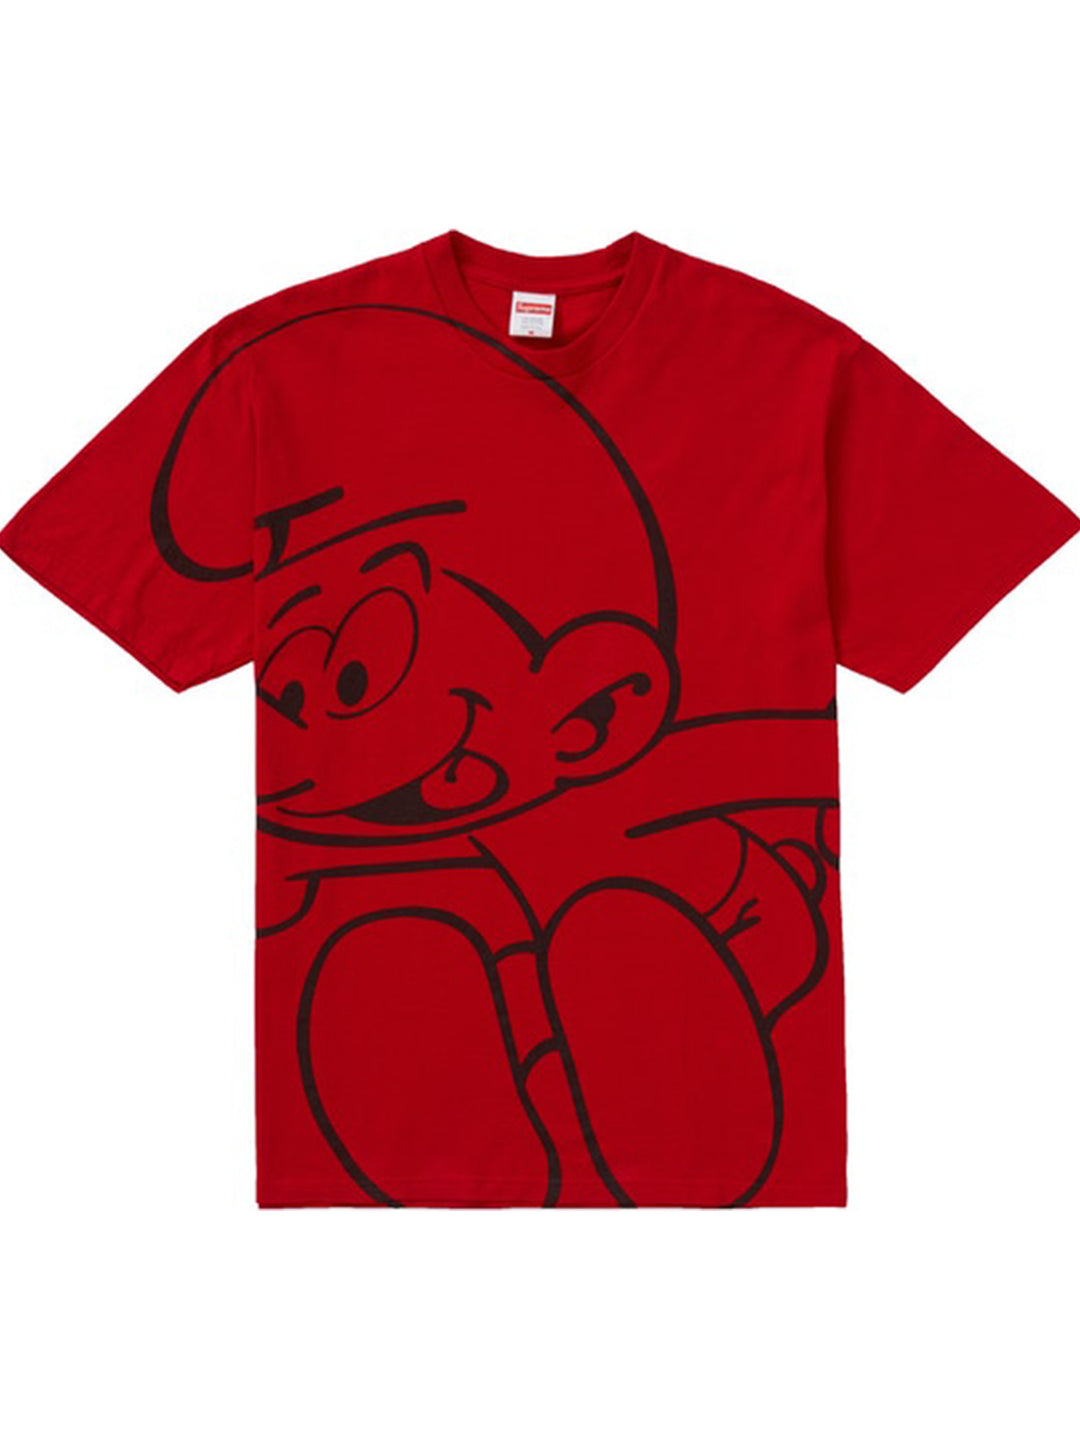 Supreme Smurfs All Over Tee Red [FW20] Prior